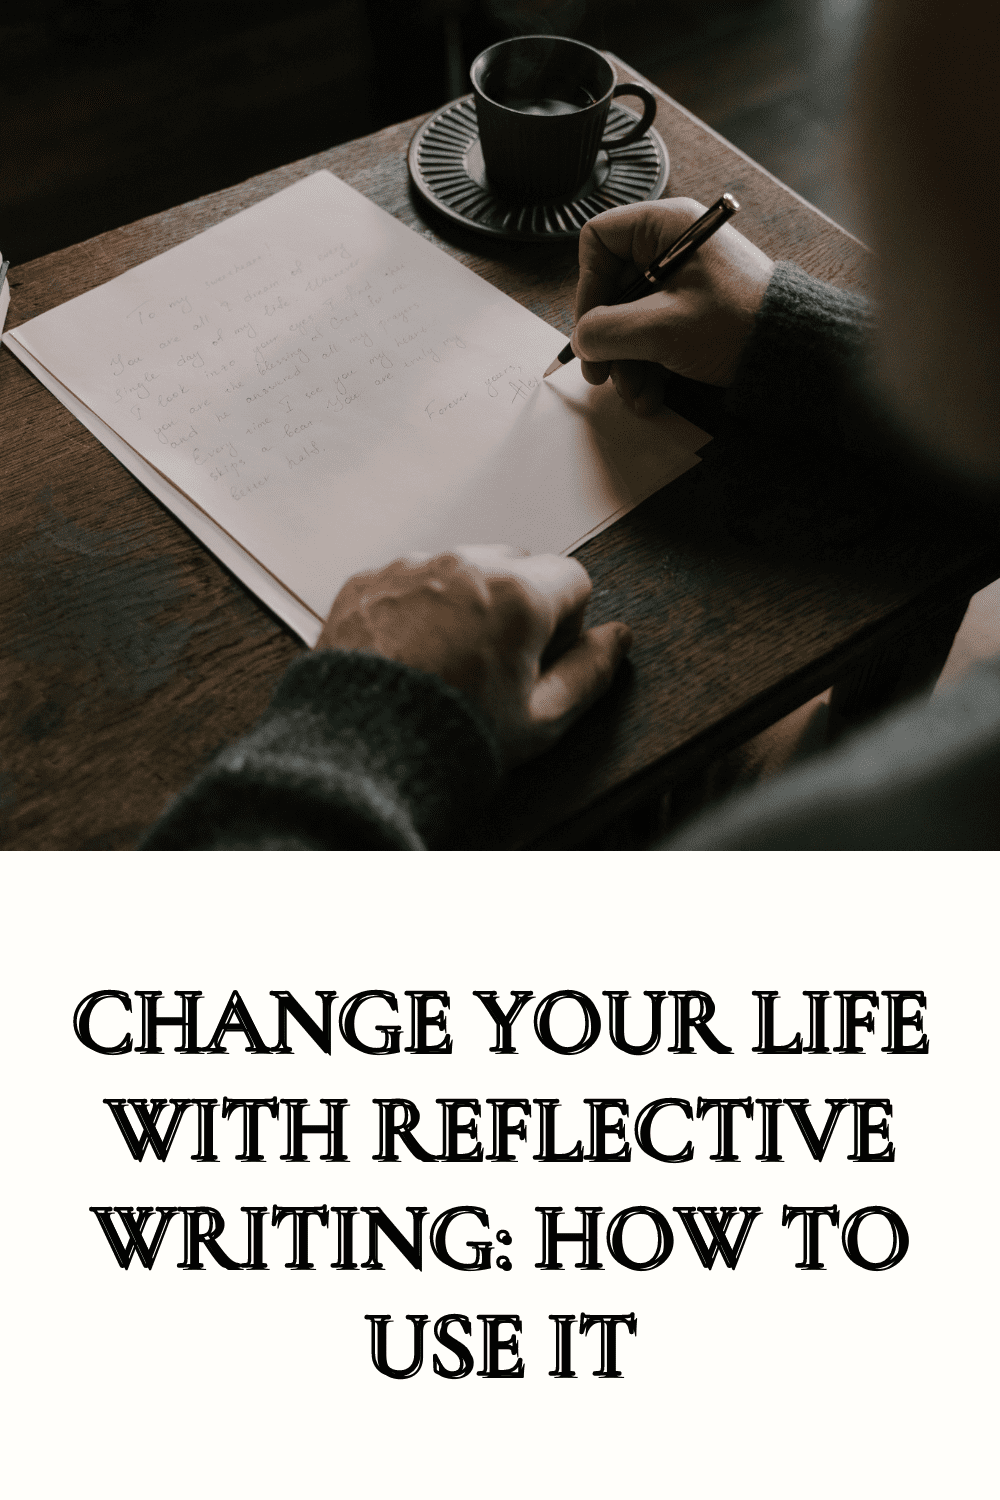 You Can Change Your Life With Reflective Writing: How To Use It